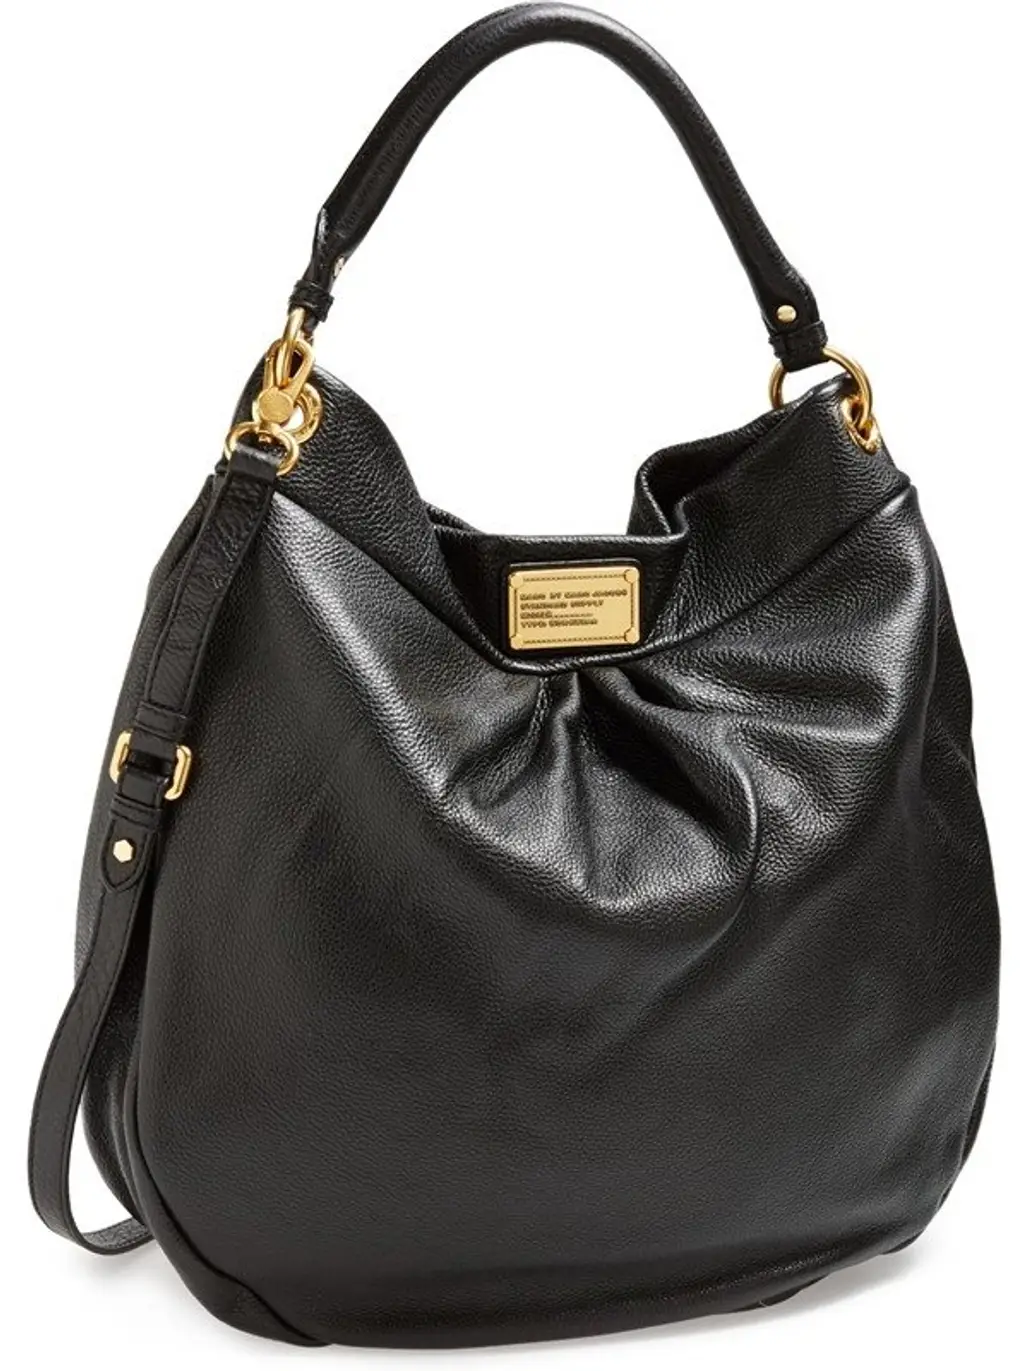 7 Classic Purses That You Should Consider Splurging on ...